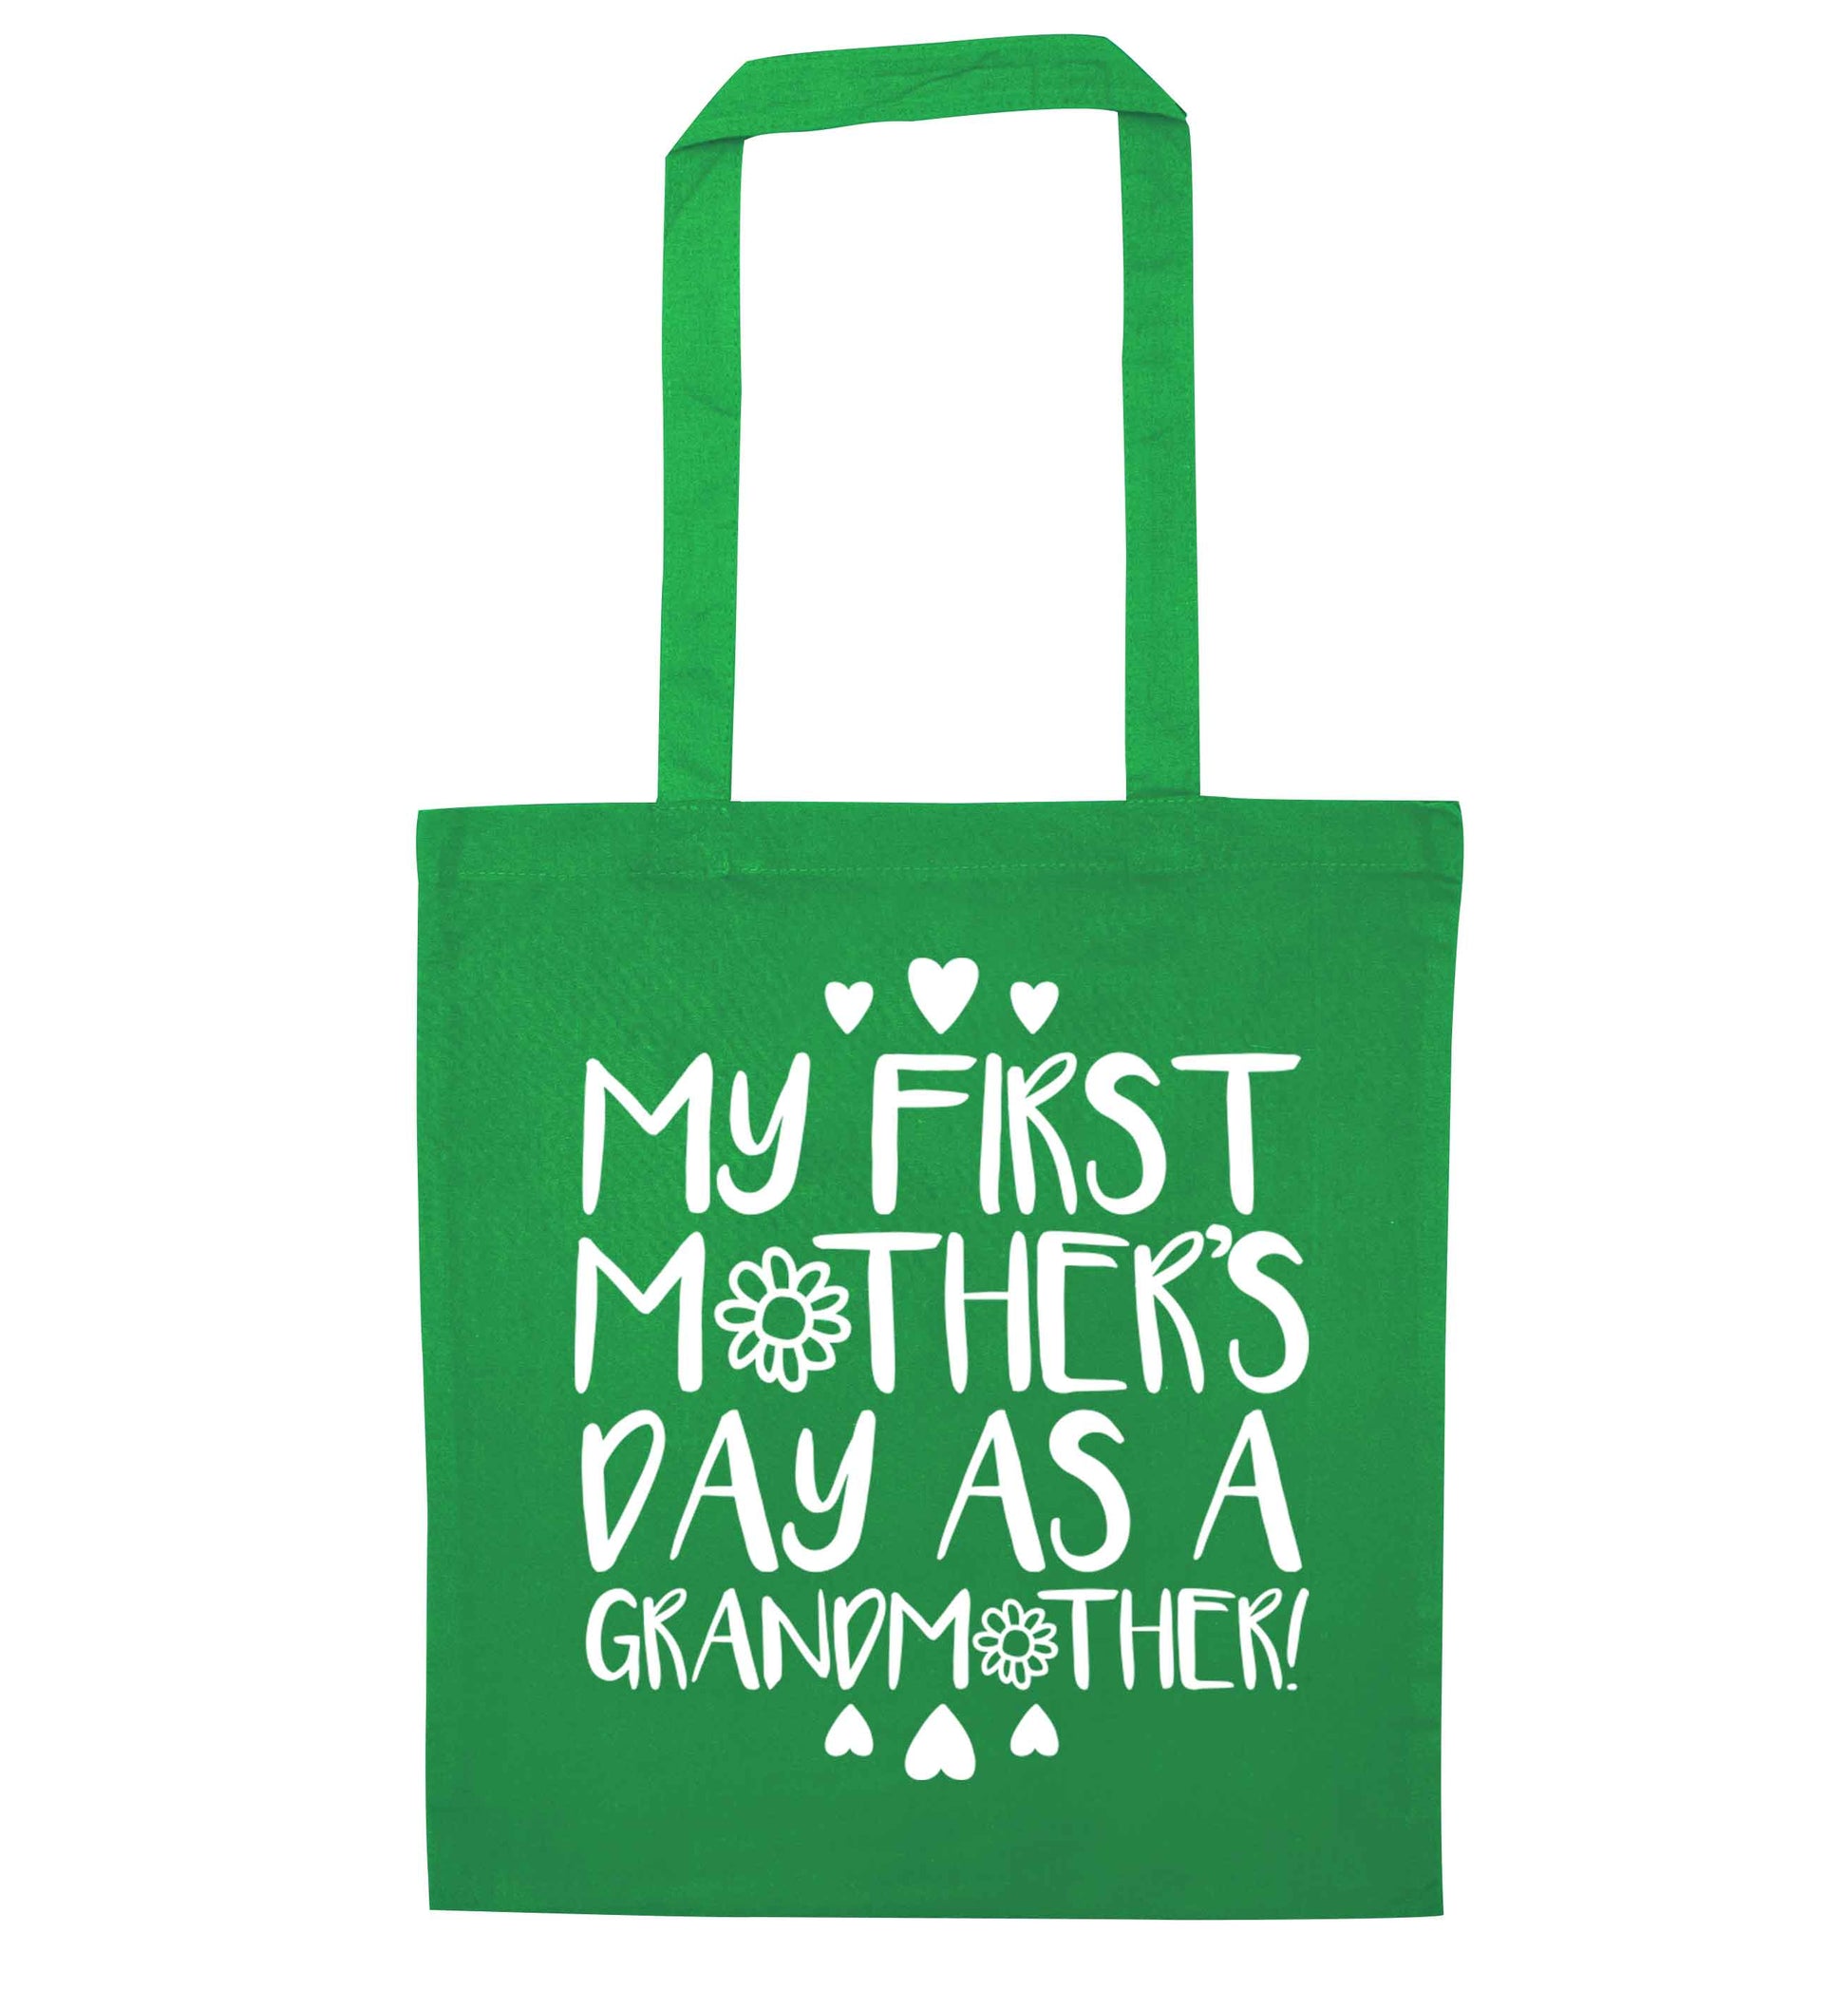 It's my first mother's day as a grandmother green tote bag